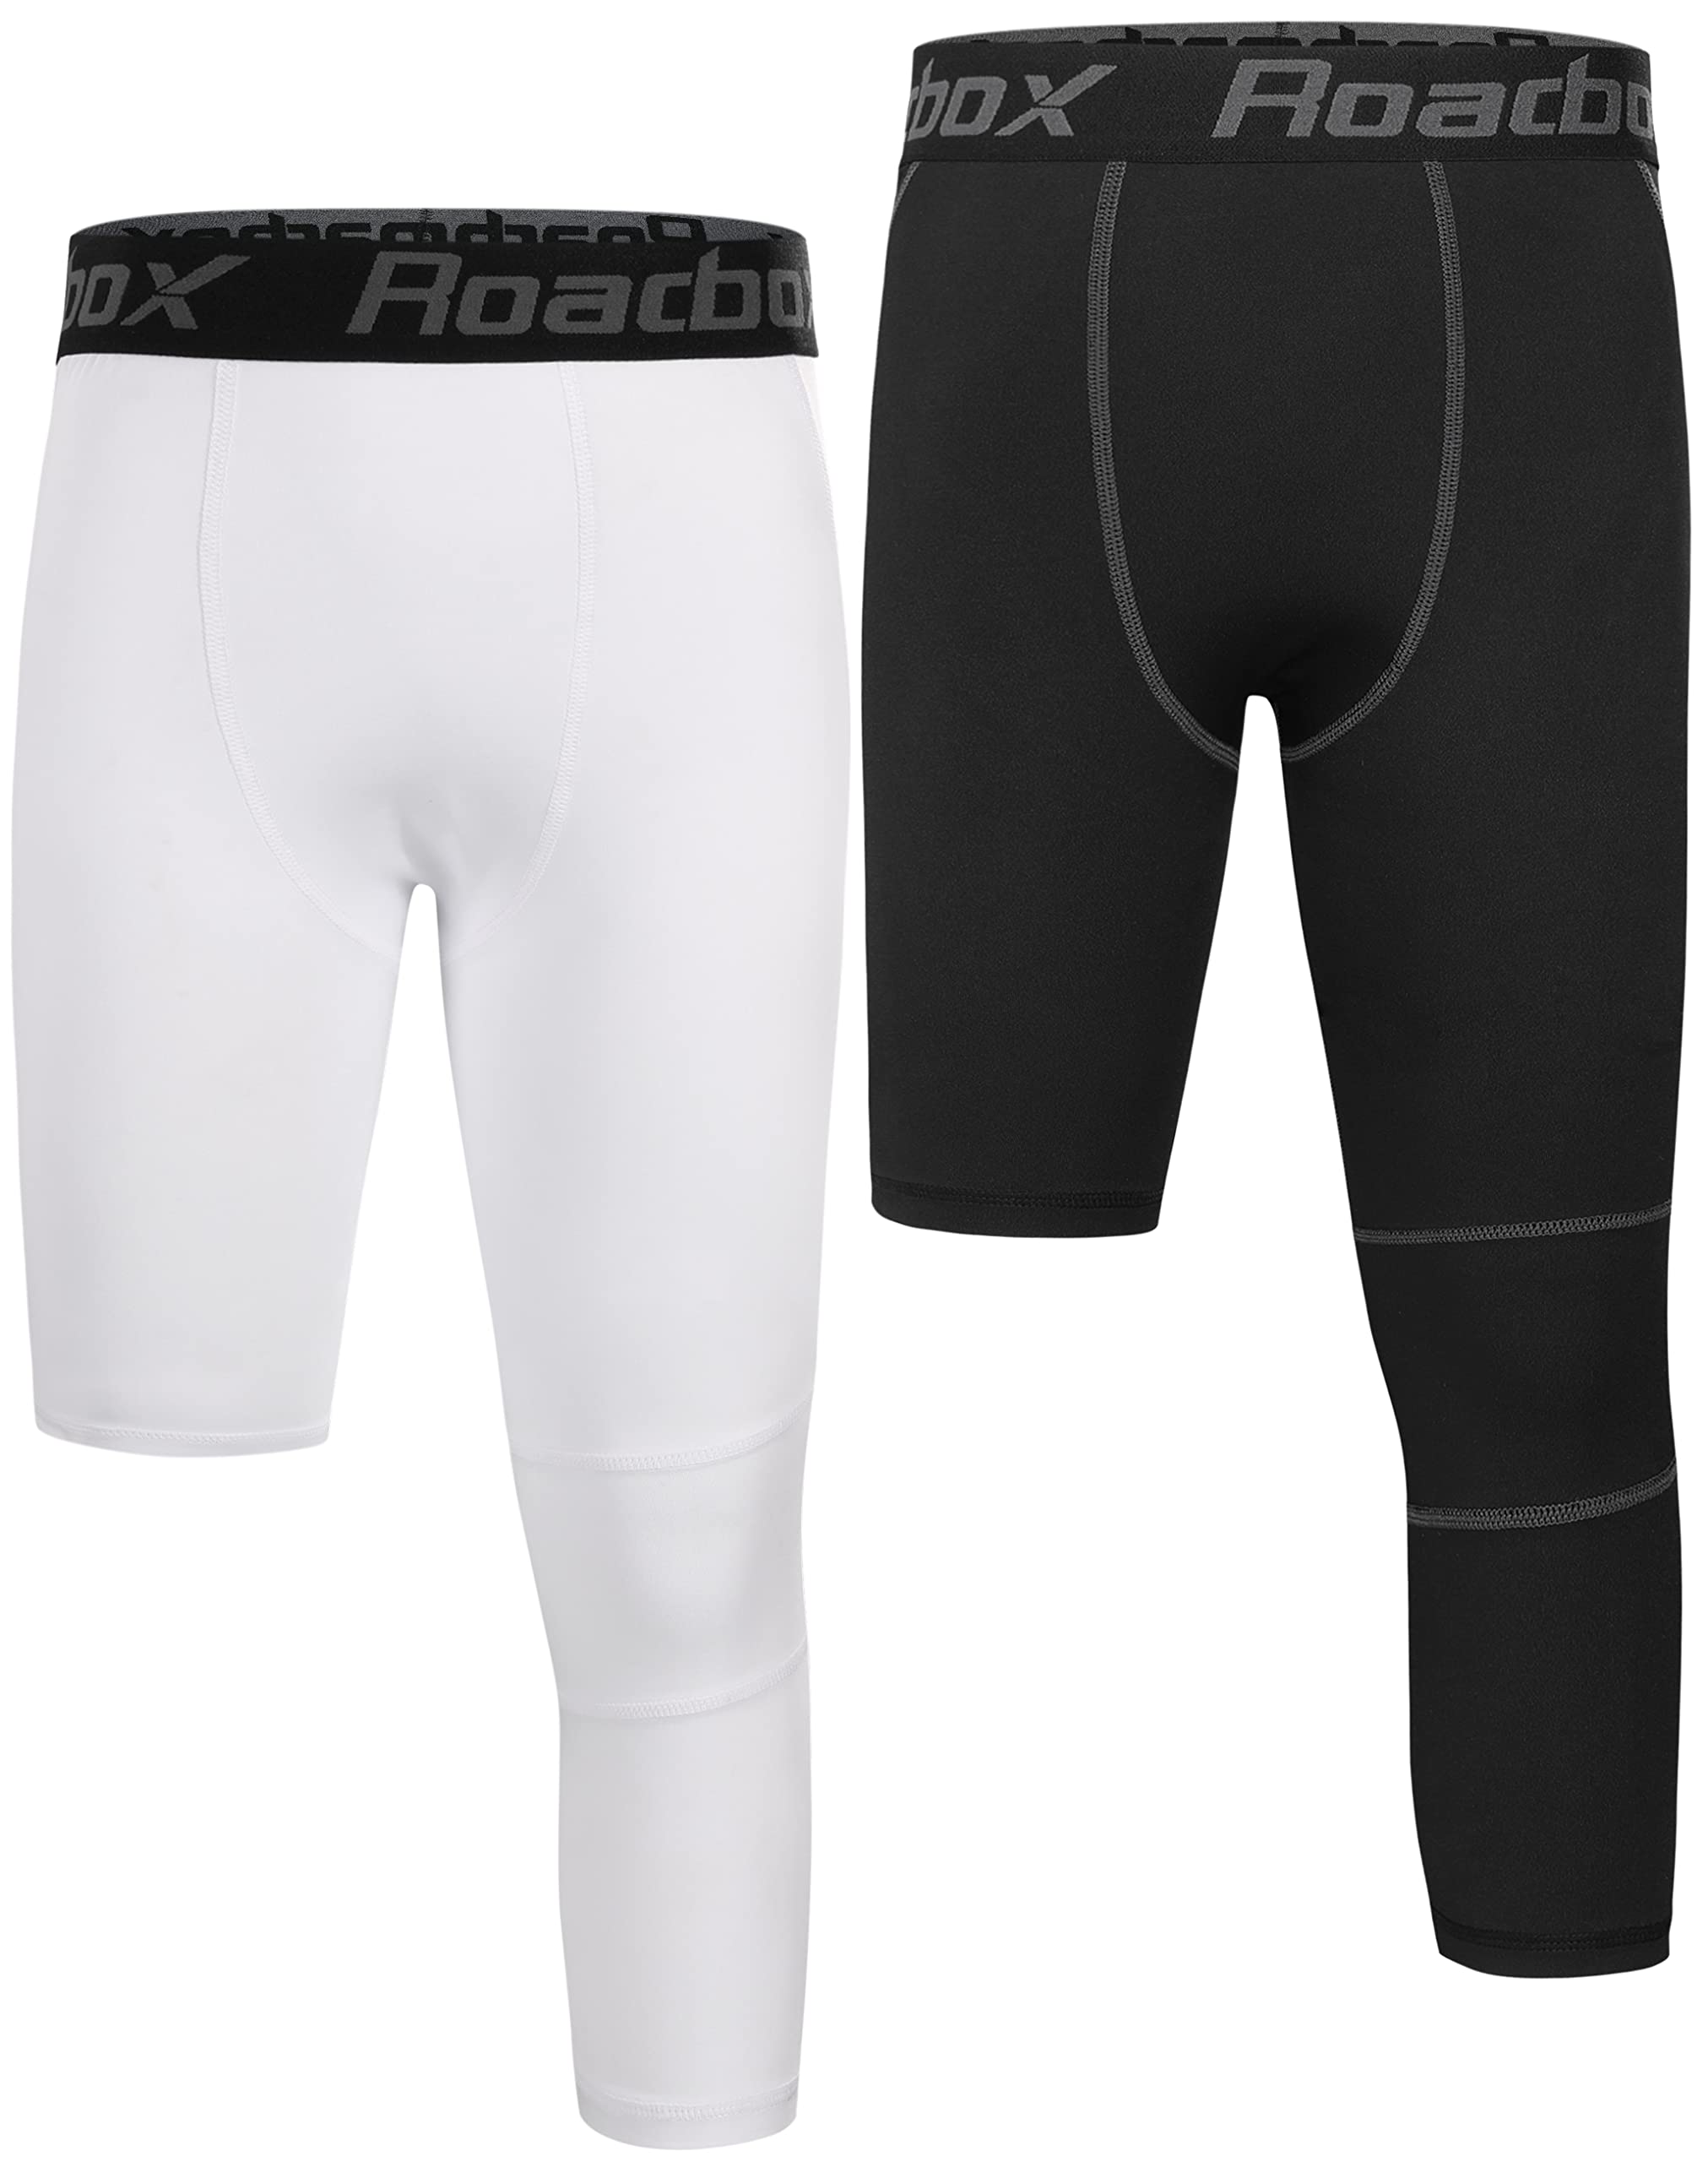  Boys 3/4 Compression Pants Leggings Tights For